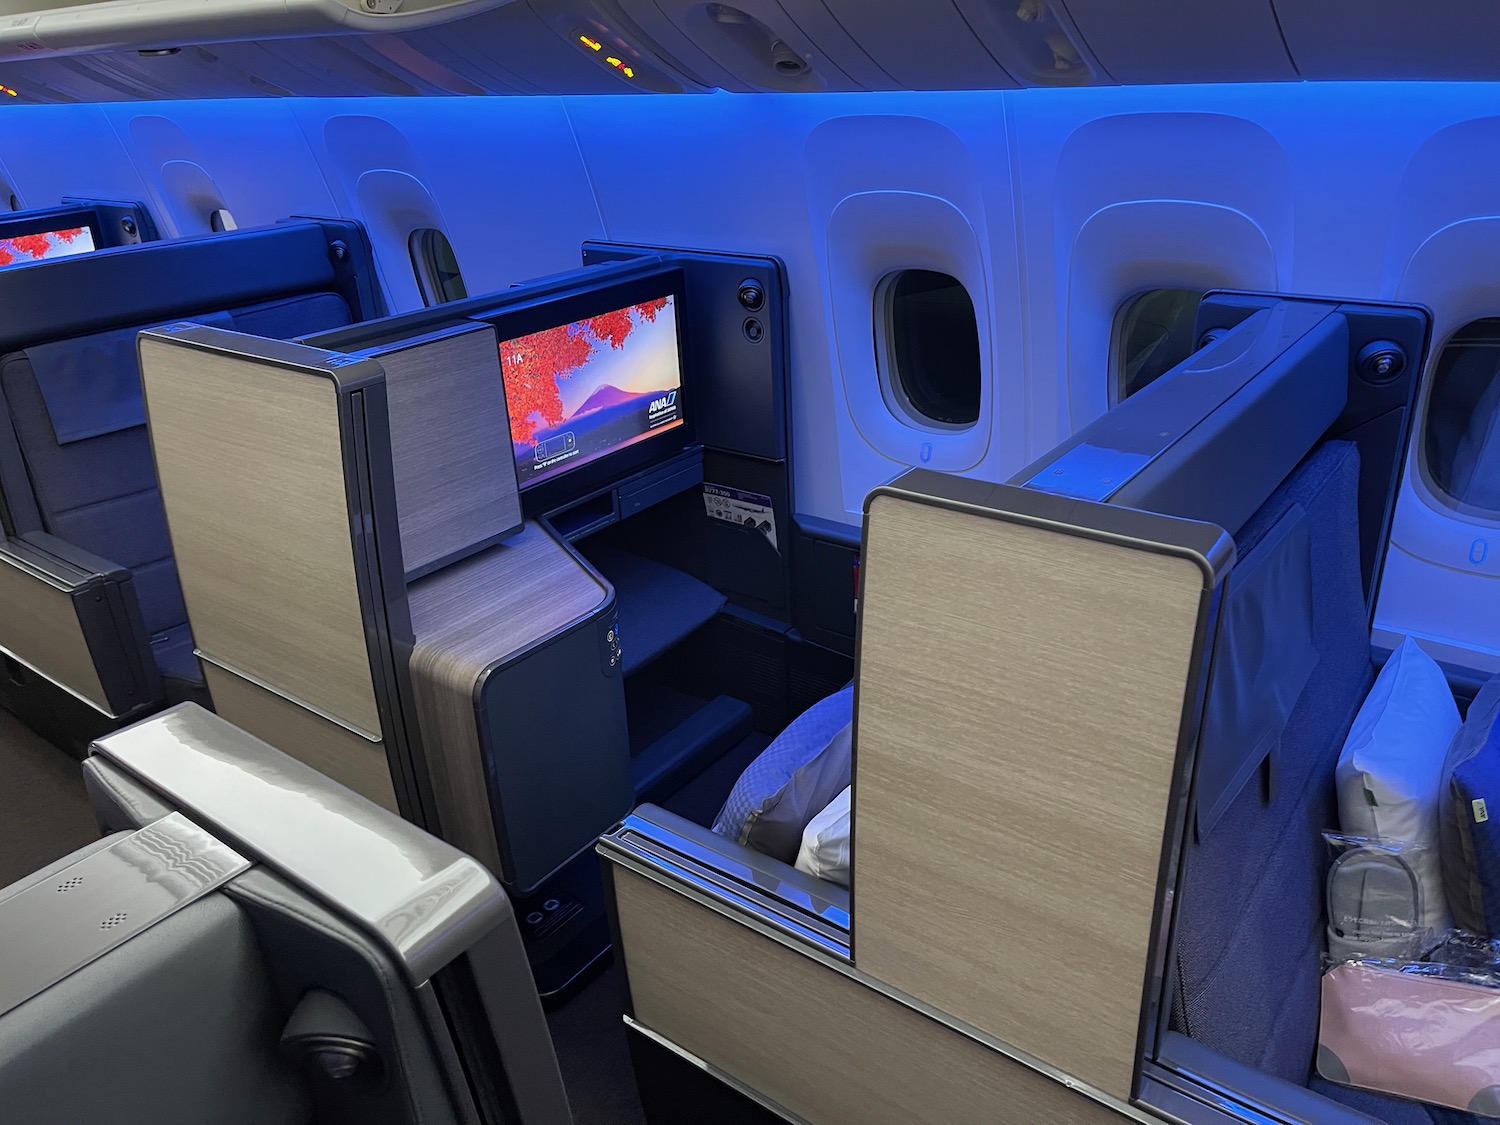 ANA "The Room" Business Class Simply Spectacular Live And Let's Fly